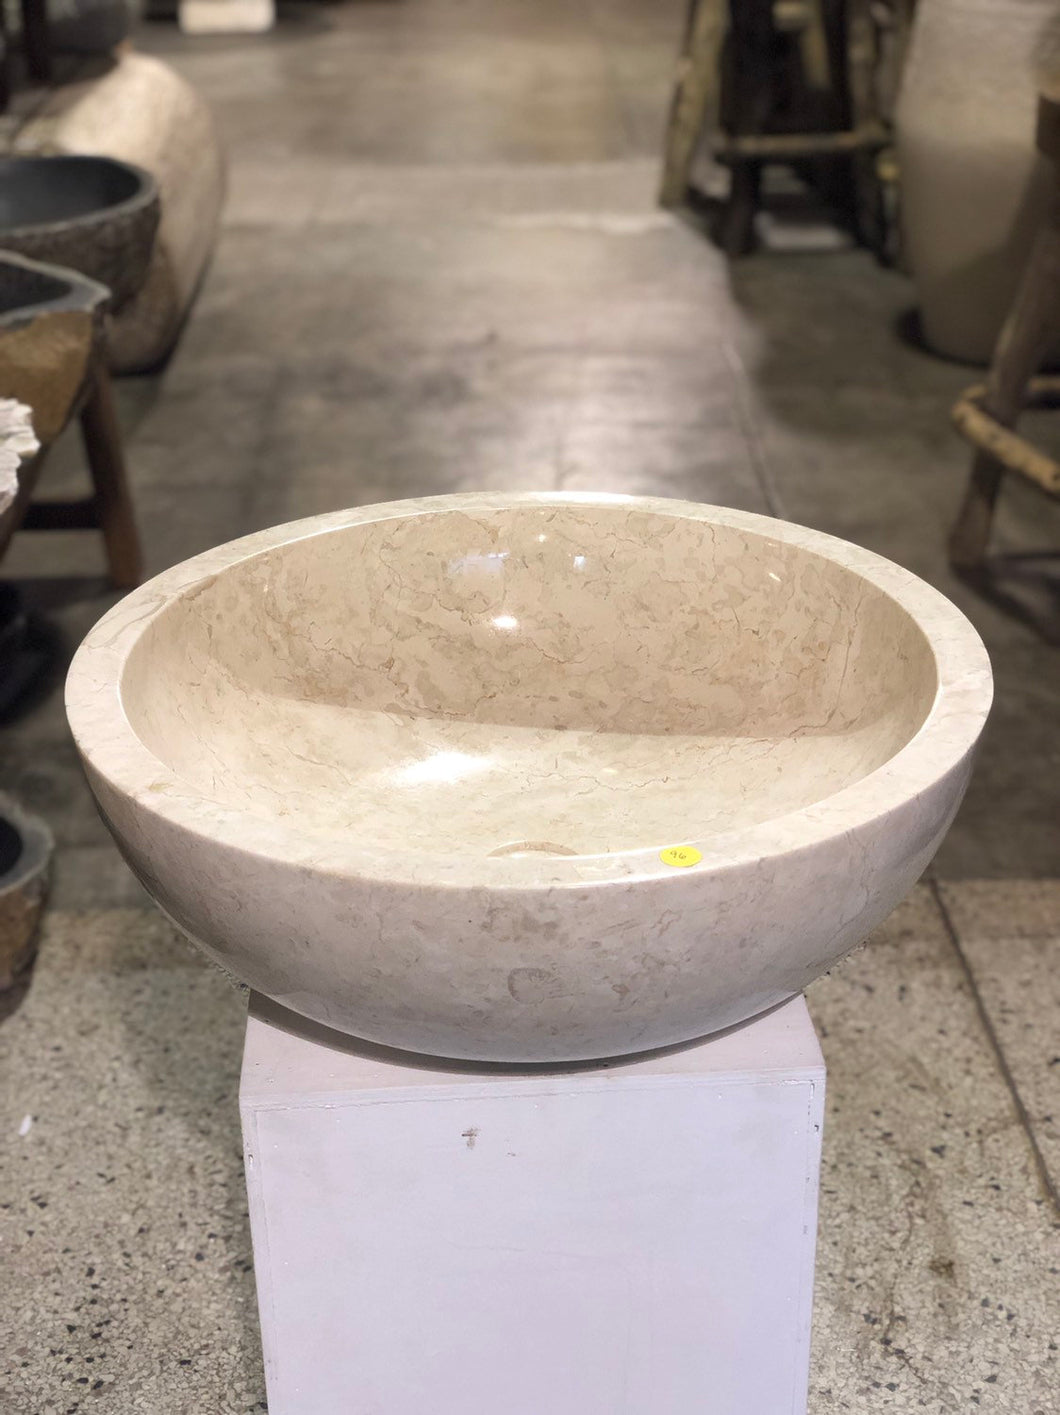 Large Natural Marble Vessel Sink | Smooth Finish Cream Color